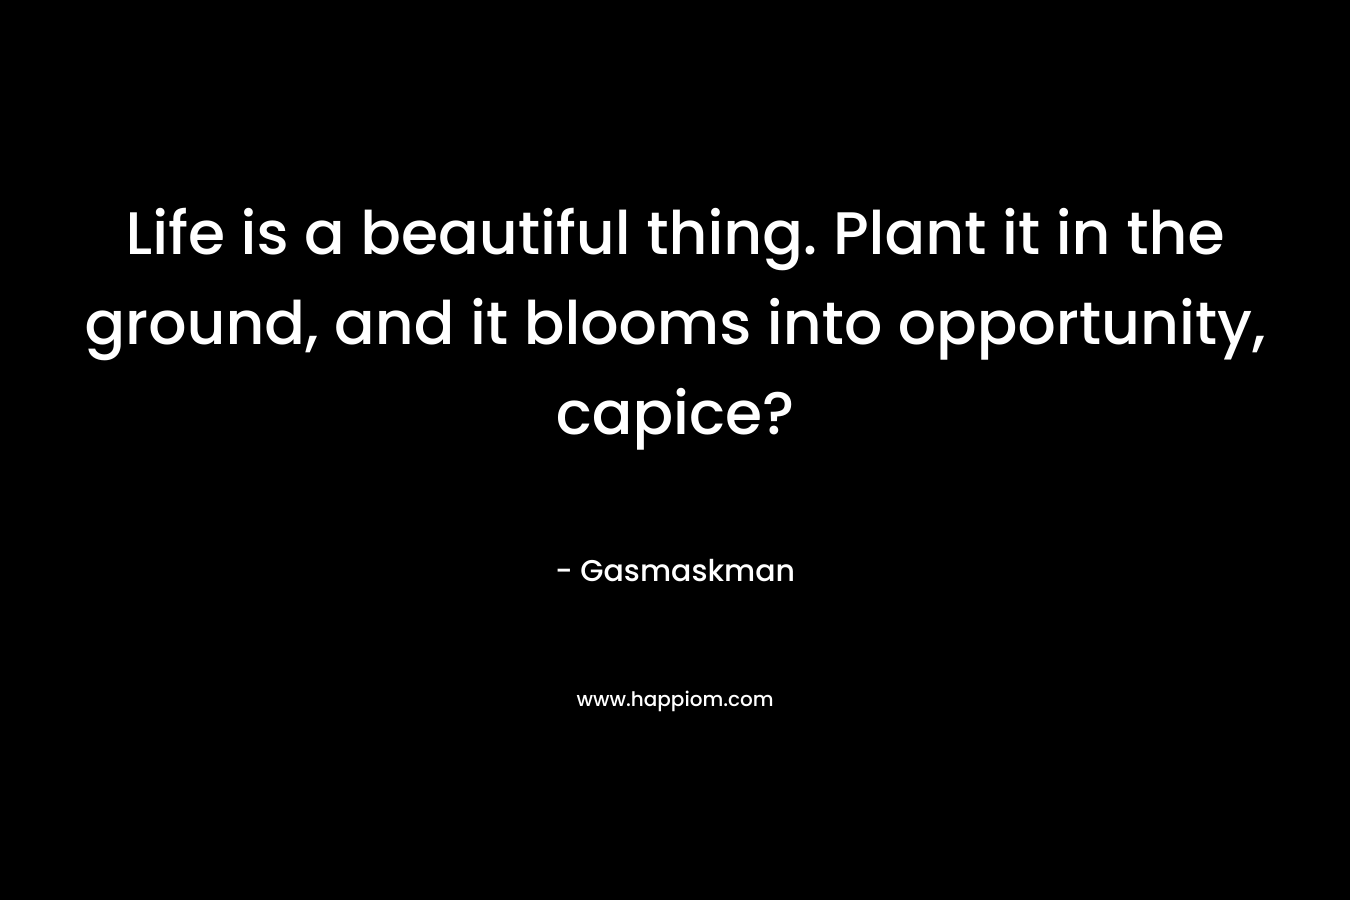 Life is a beautiful thing. Plant it in the ground, and it blooms into opportunity, capice?